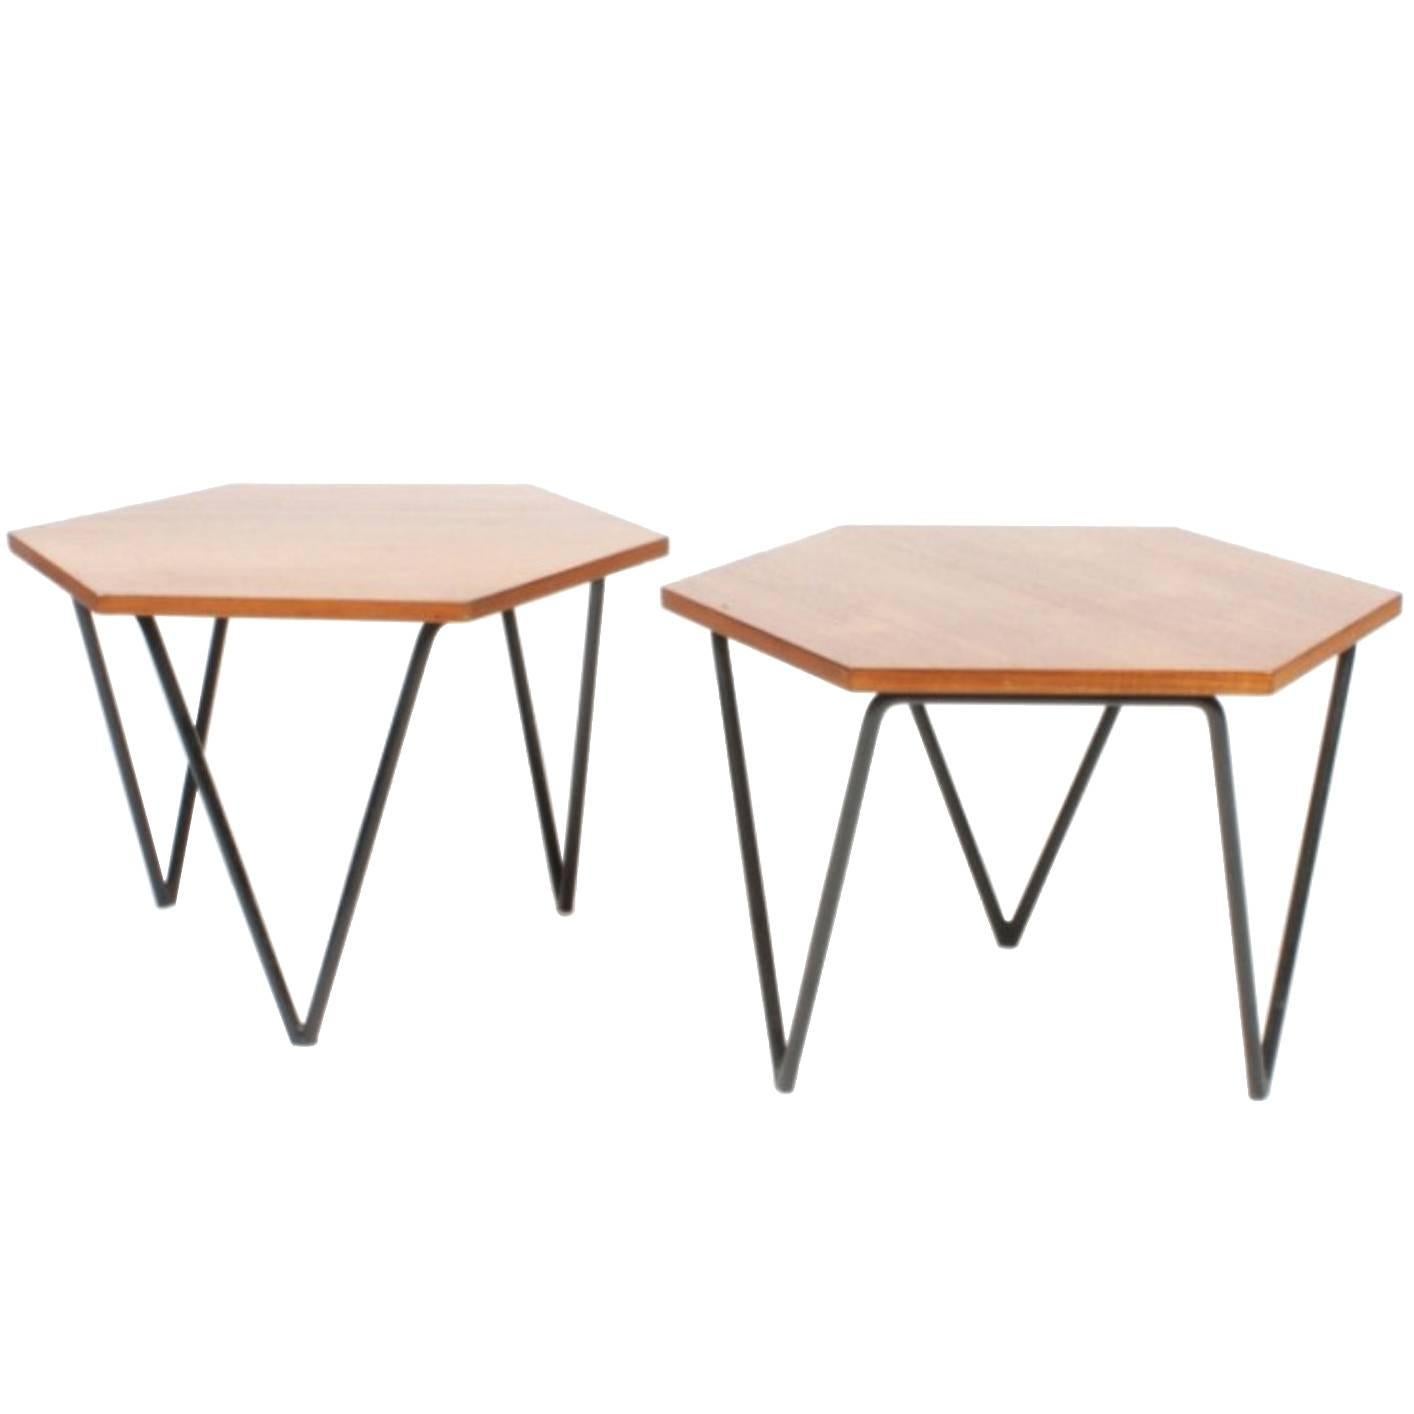 Pair of Elegant Side Tables by Gio Ponti, Isa Edition, 1950s For Sale